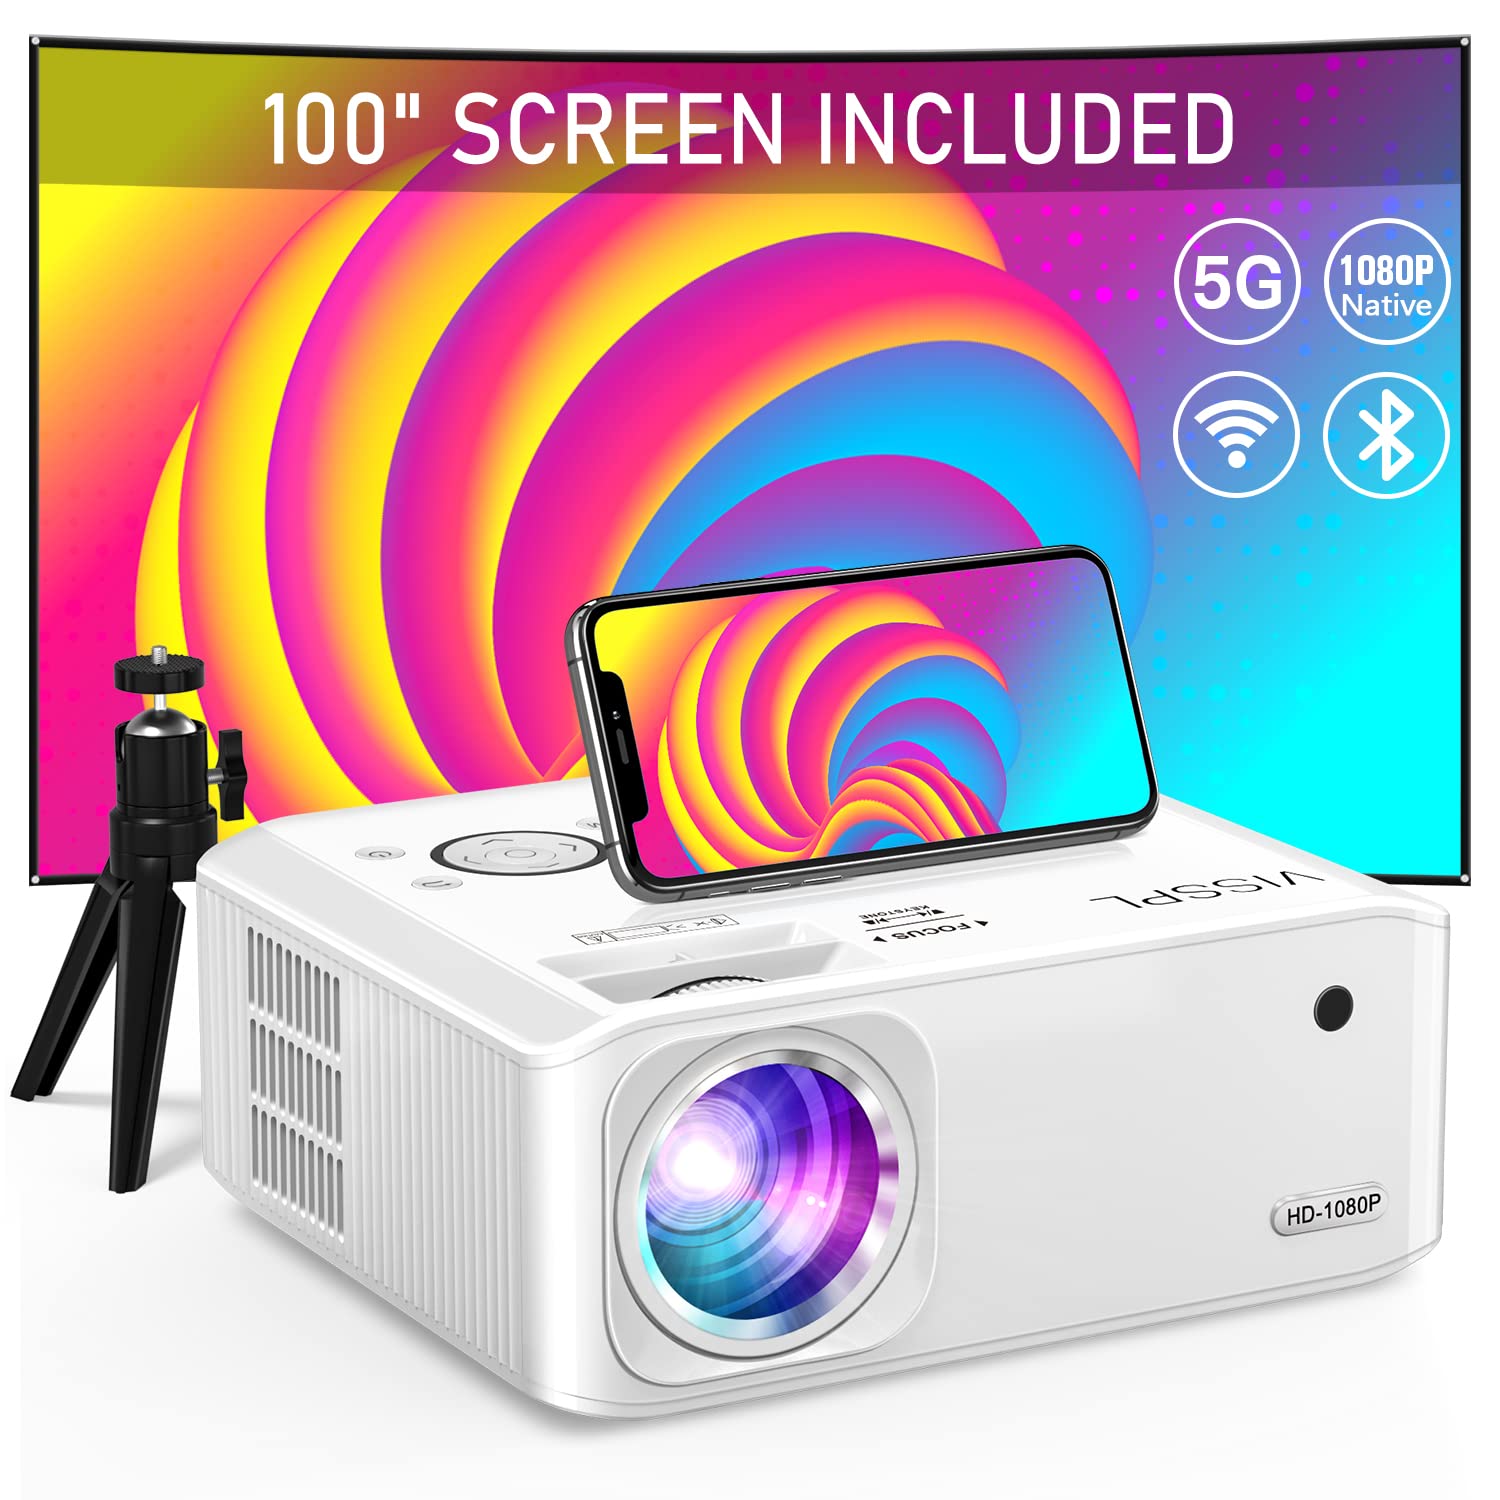 [Electric Focus] Projector with WiFi and Bluetooth, 6D/4P Keystone 15000L VISSPL 5G Native 1080P Projector 4K Support, 50% Zoom Outdoor Movie Projector for iOS & Android Phone, Laptop, HDMI,USB,TV Box